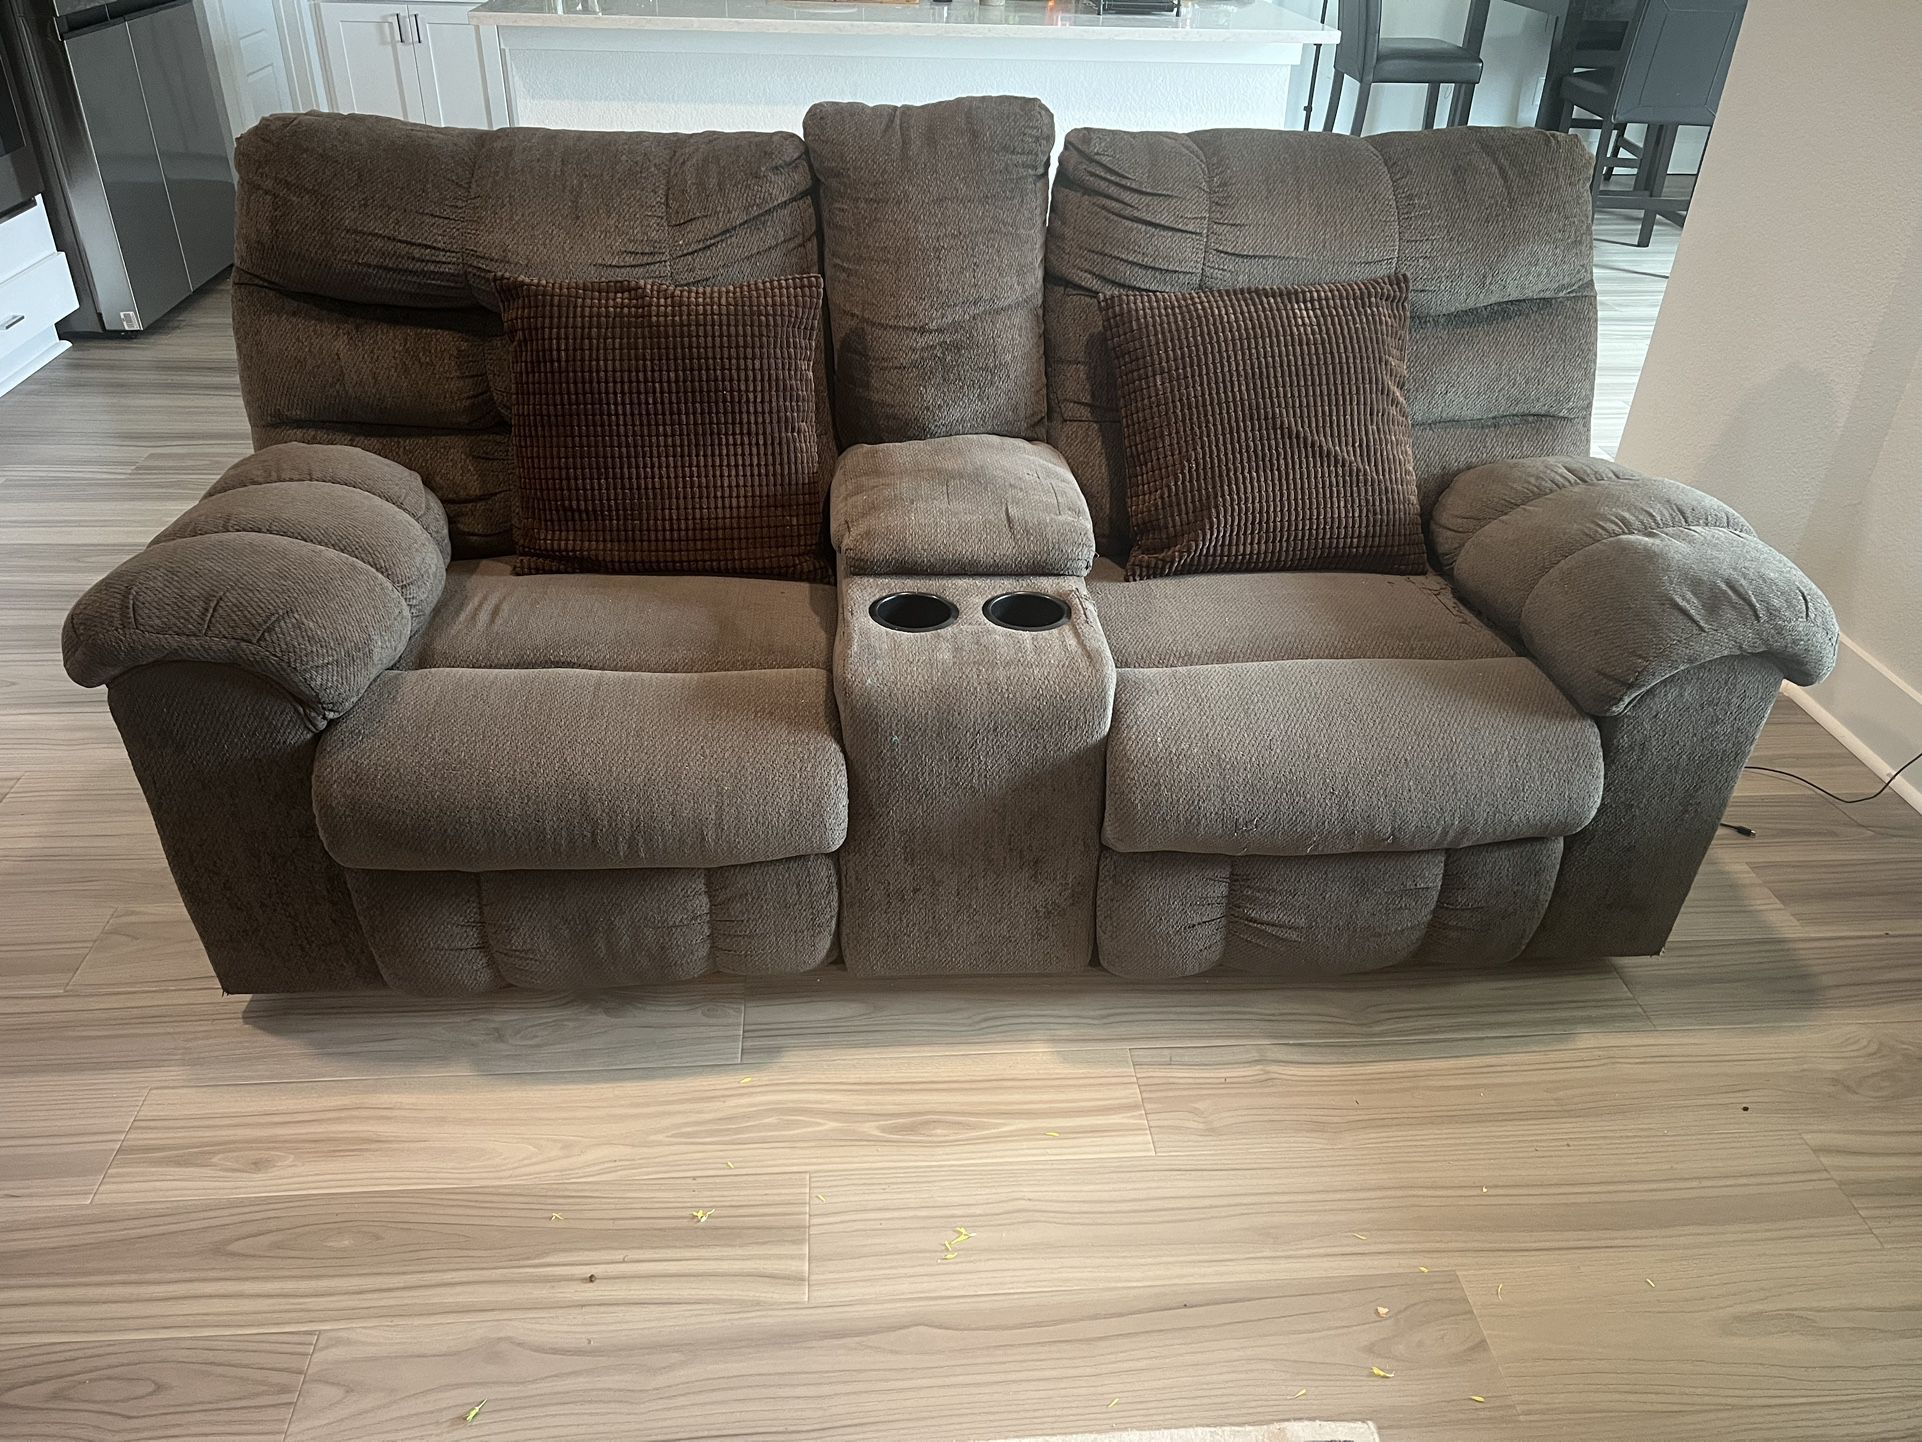 Recliner 3 Seater And 2 Seater With Sofa Cover And Pillow